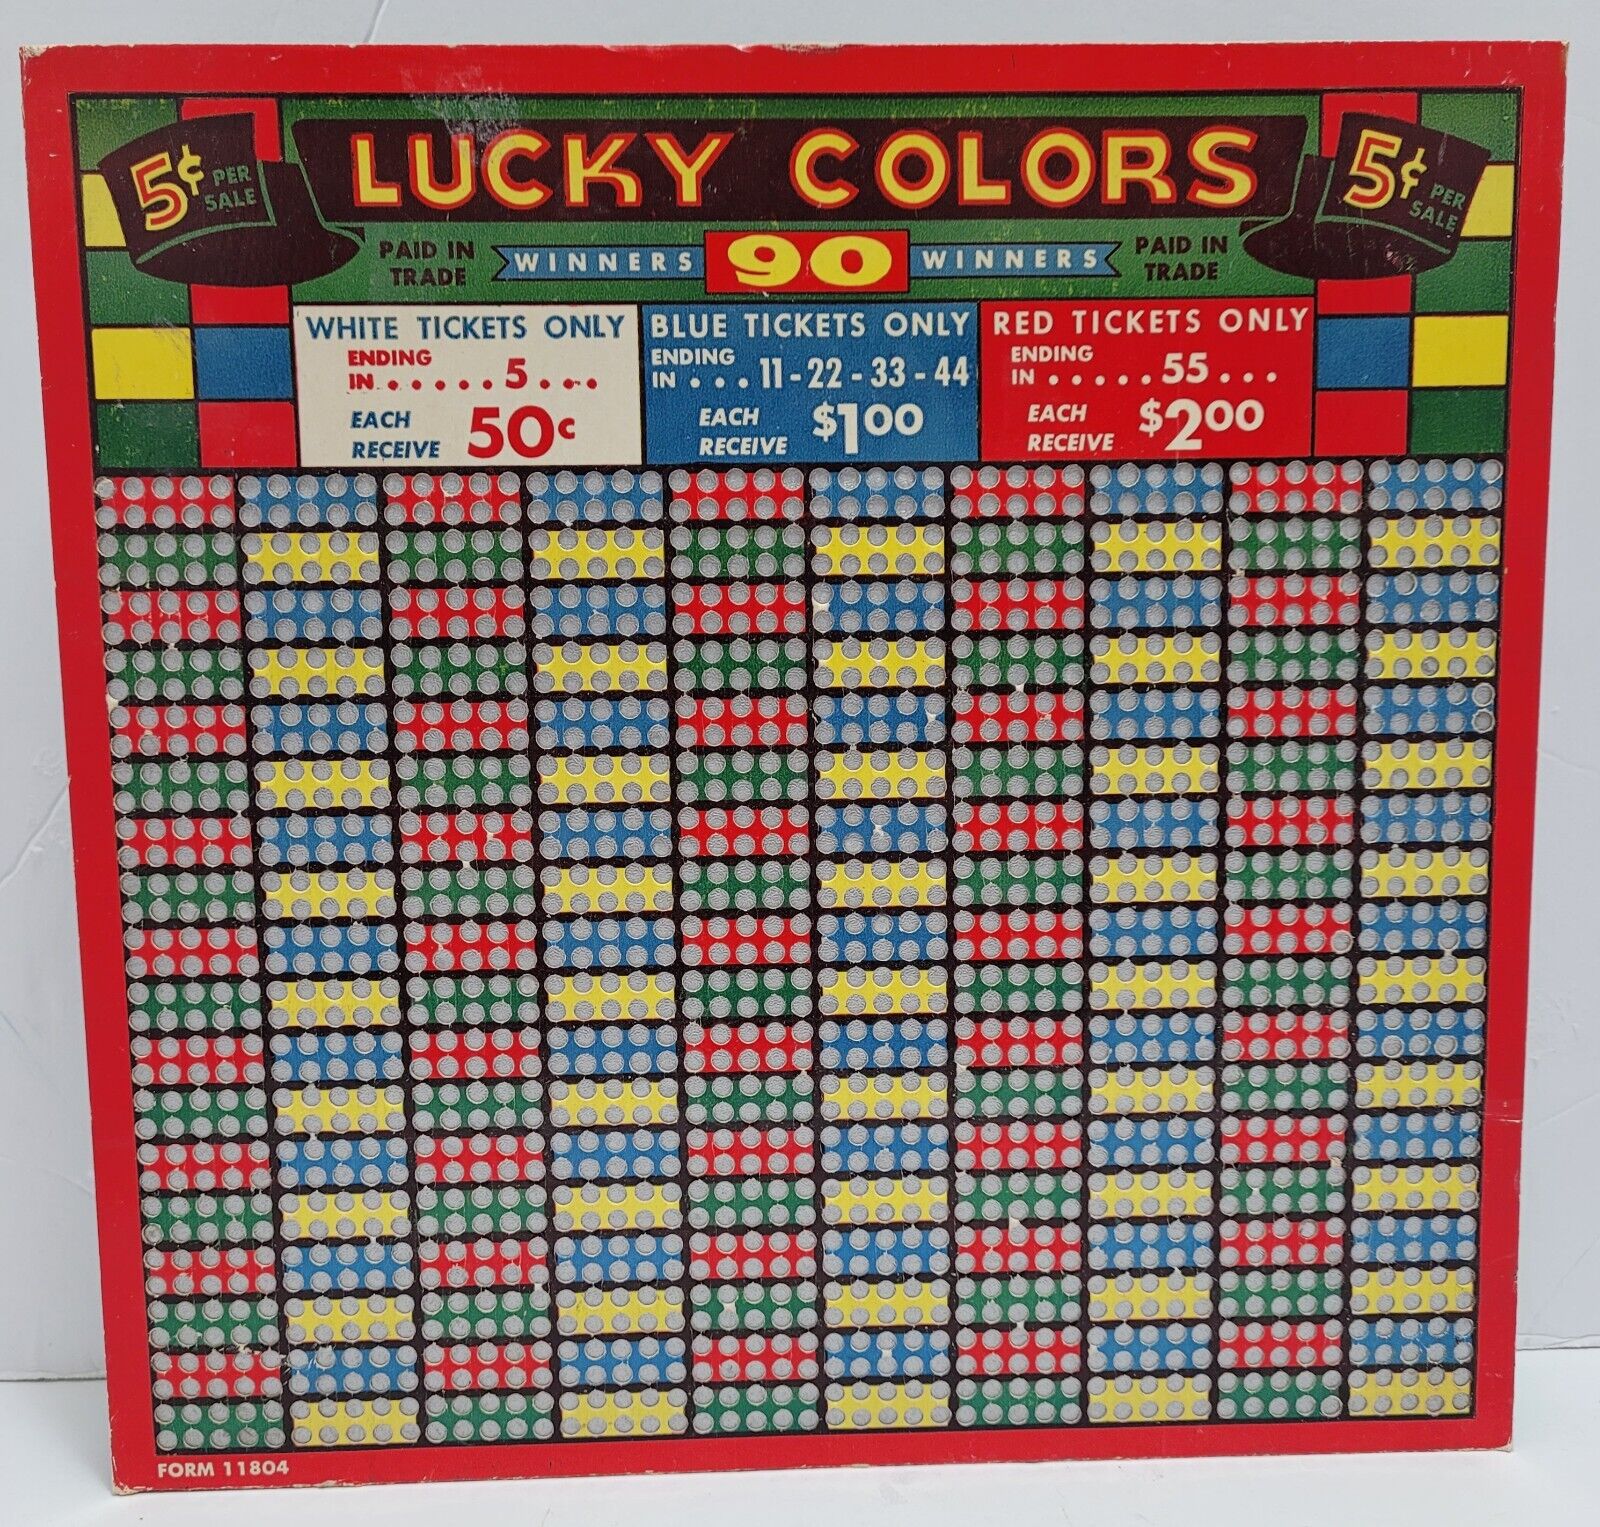 VINTAGE LUCKY COLORS PUNCH BOARD UNPUNCHED WITH ORIGINAL PUNCH KEY